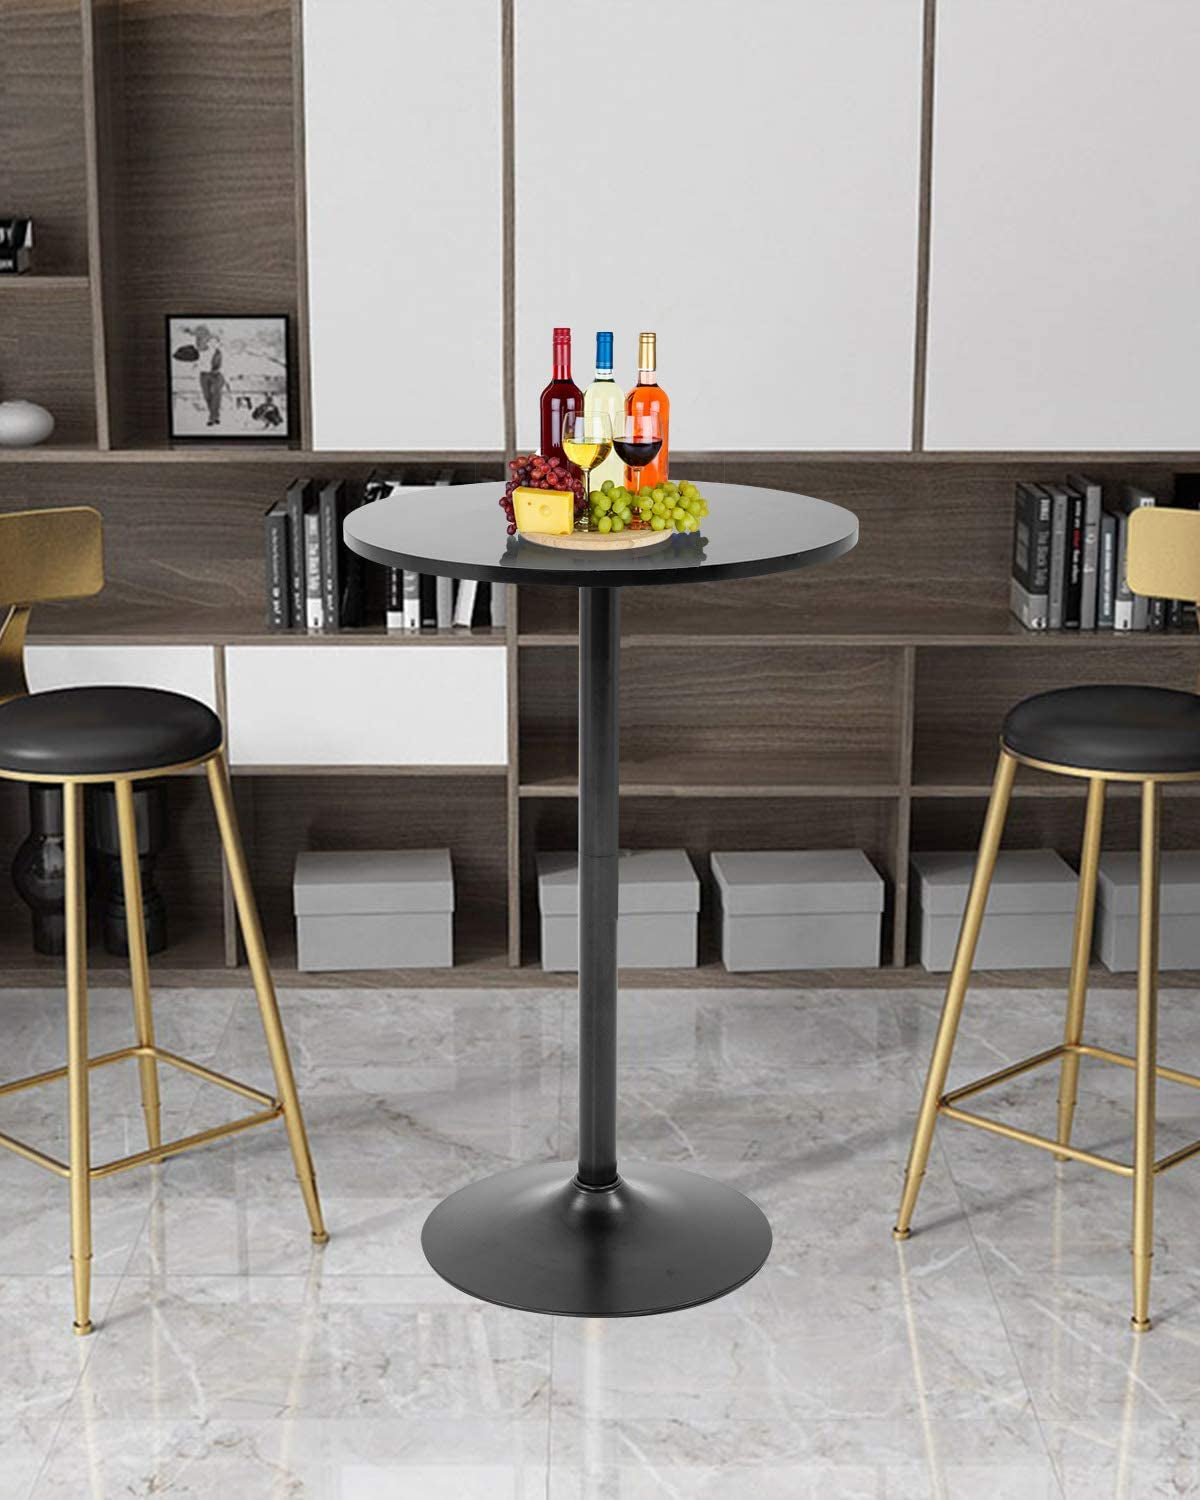 Modern Bar Table Kitchen Dining Table round Pub Table Hydraulic Dining Room Home Kitchen Table Bar Top Table Tall Table